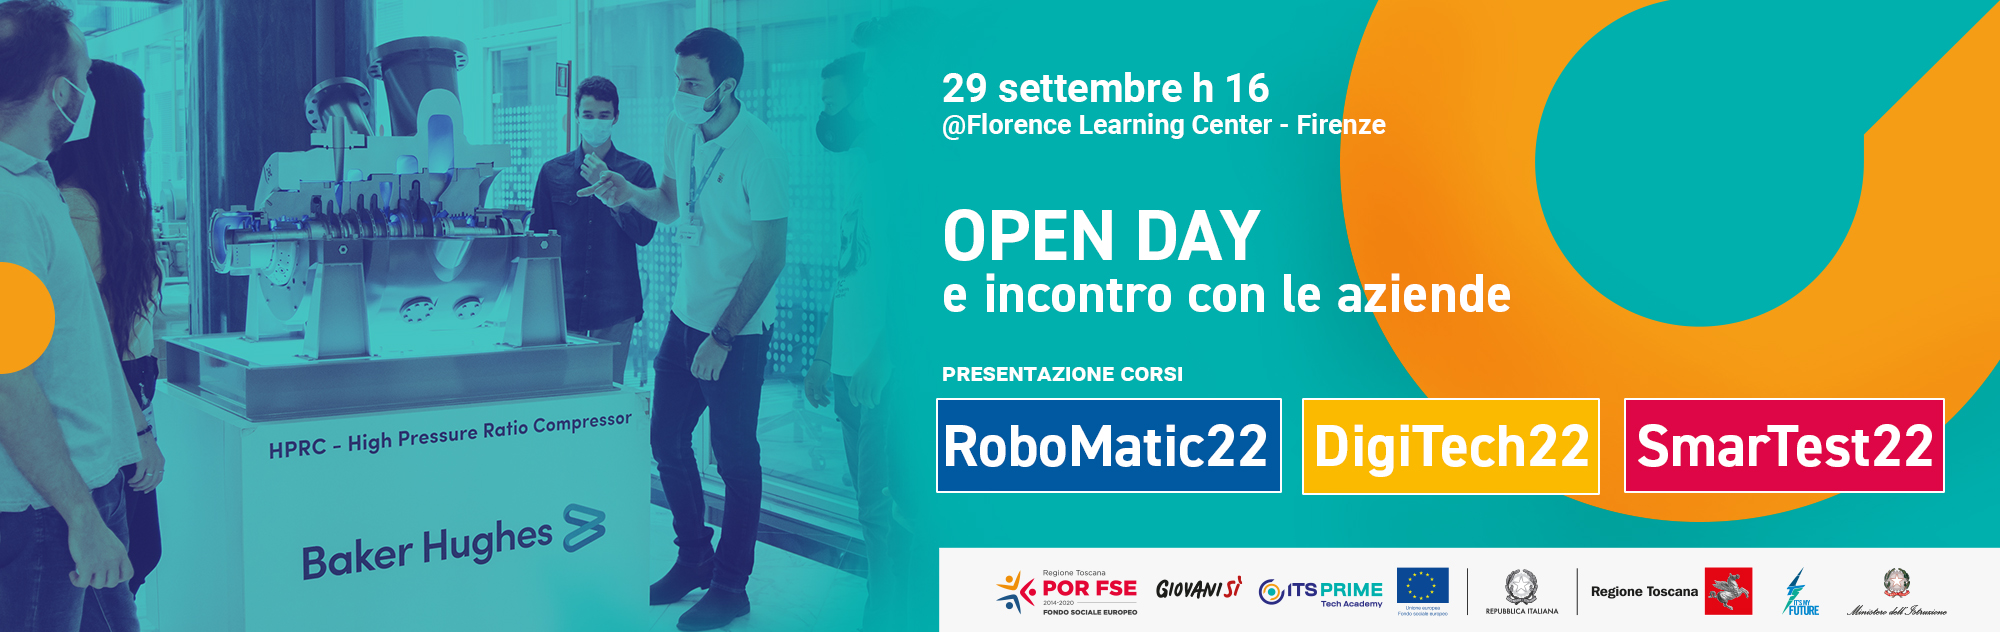 ITS-openday-firenze